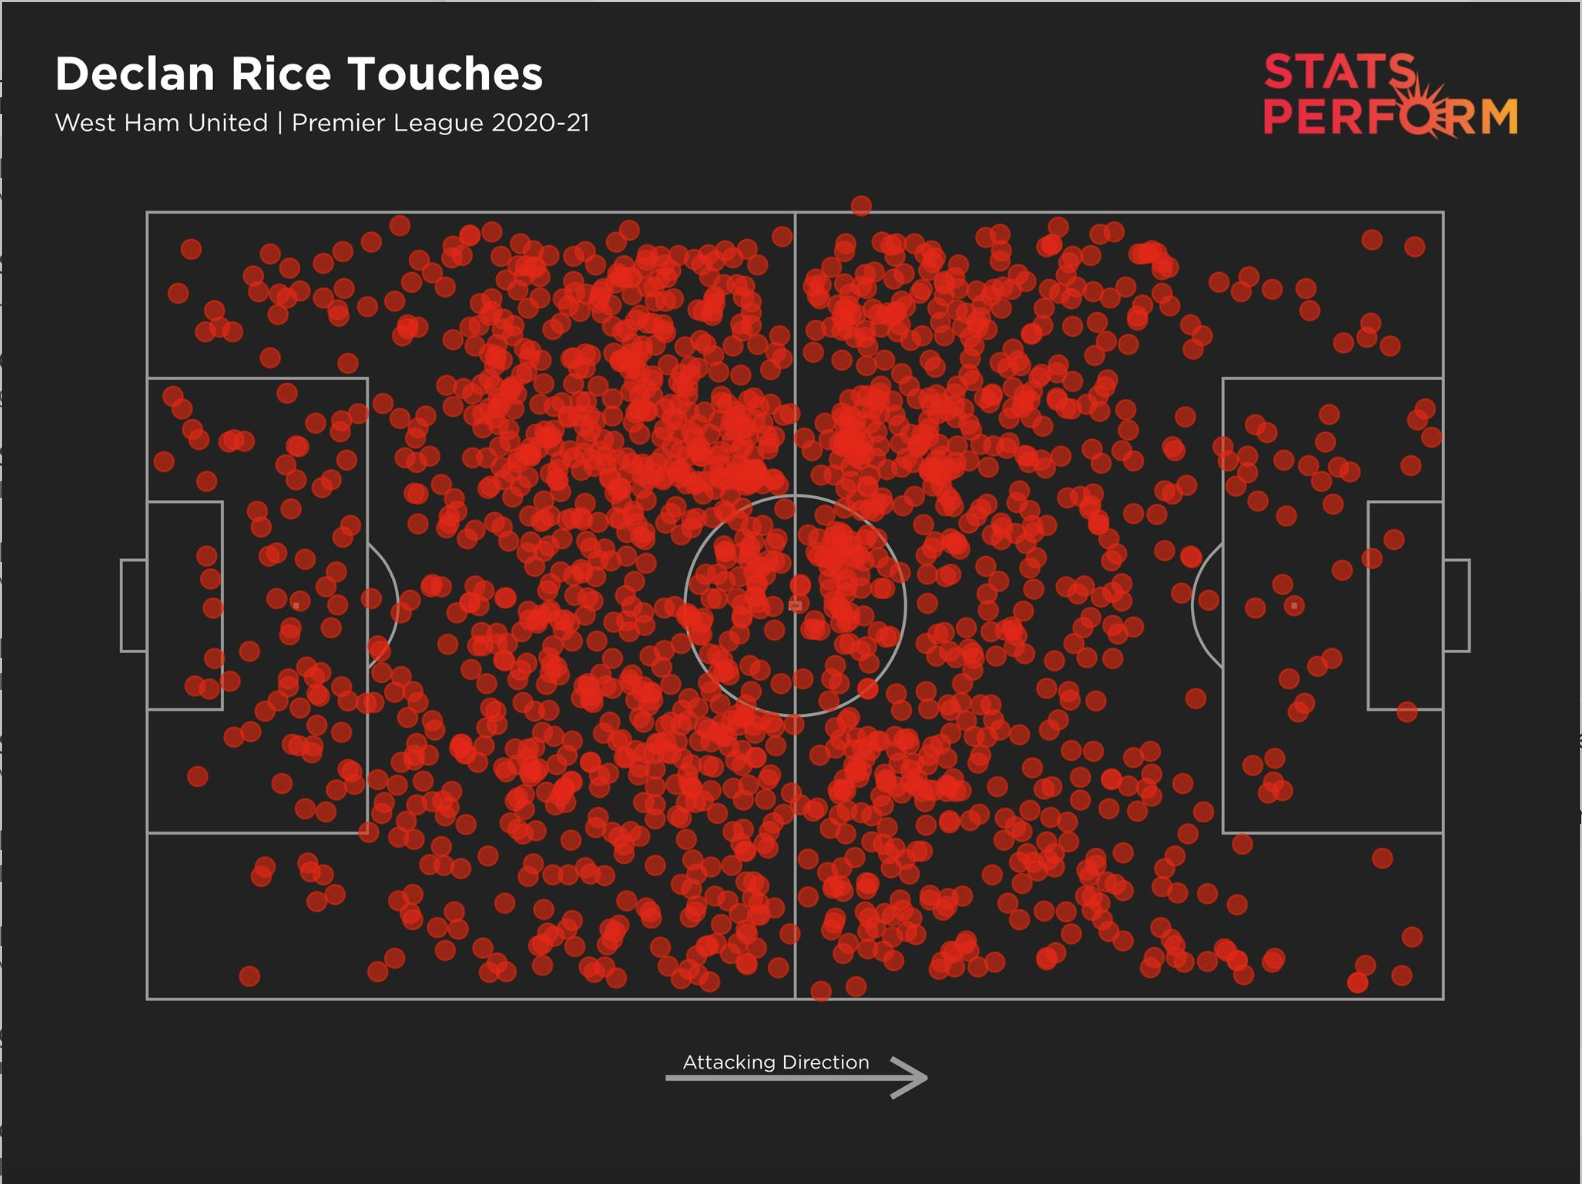 Rice's ability to get around the pitch has been a key feature of West Ham's play this season.